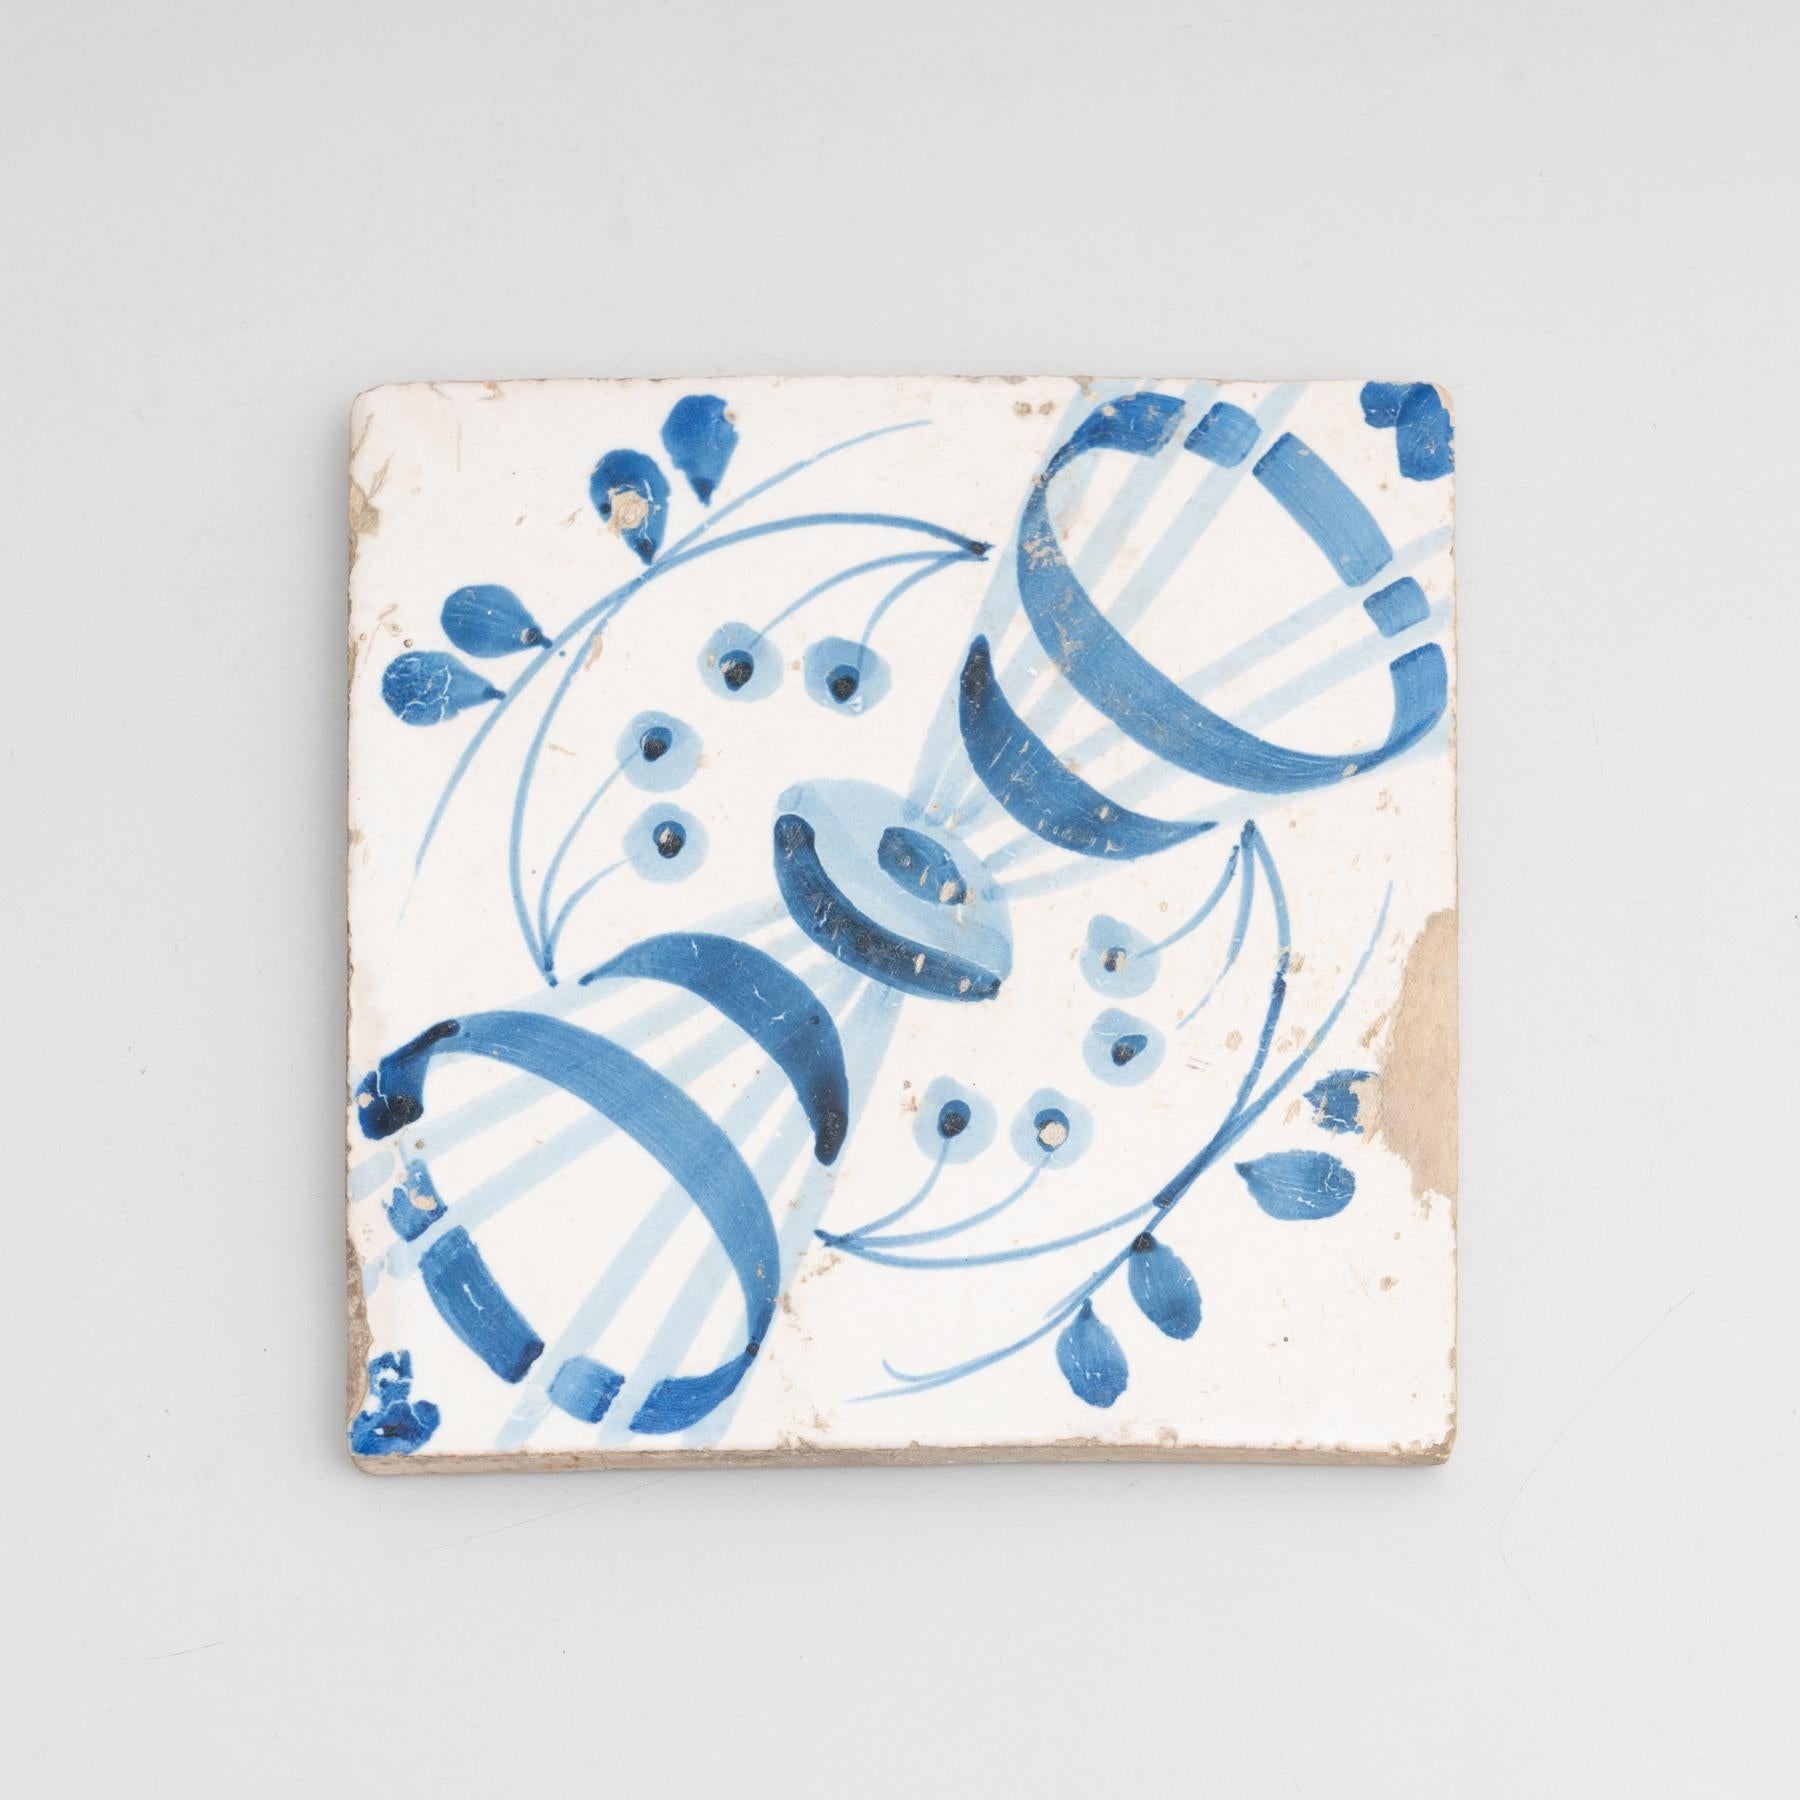 Traditional Spanish decorative ceramic tile. Made in the iconic designs of Catalan Modernism.

Manufactured by unknown artist in Spain, circa 1940.

Materials:
Ceramic

In good original condition, with minor wear consistent with age and use,